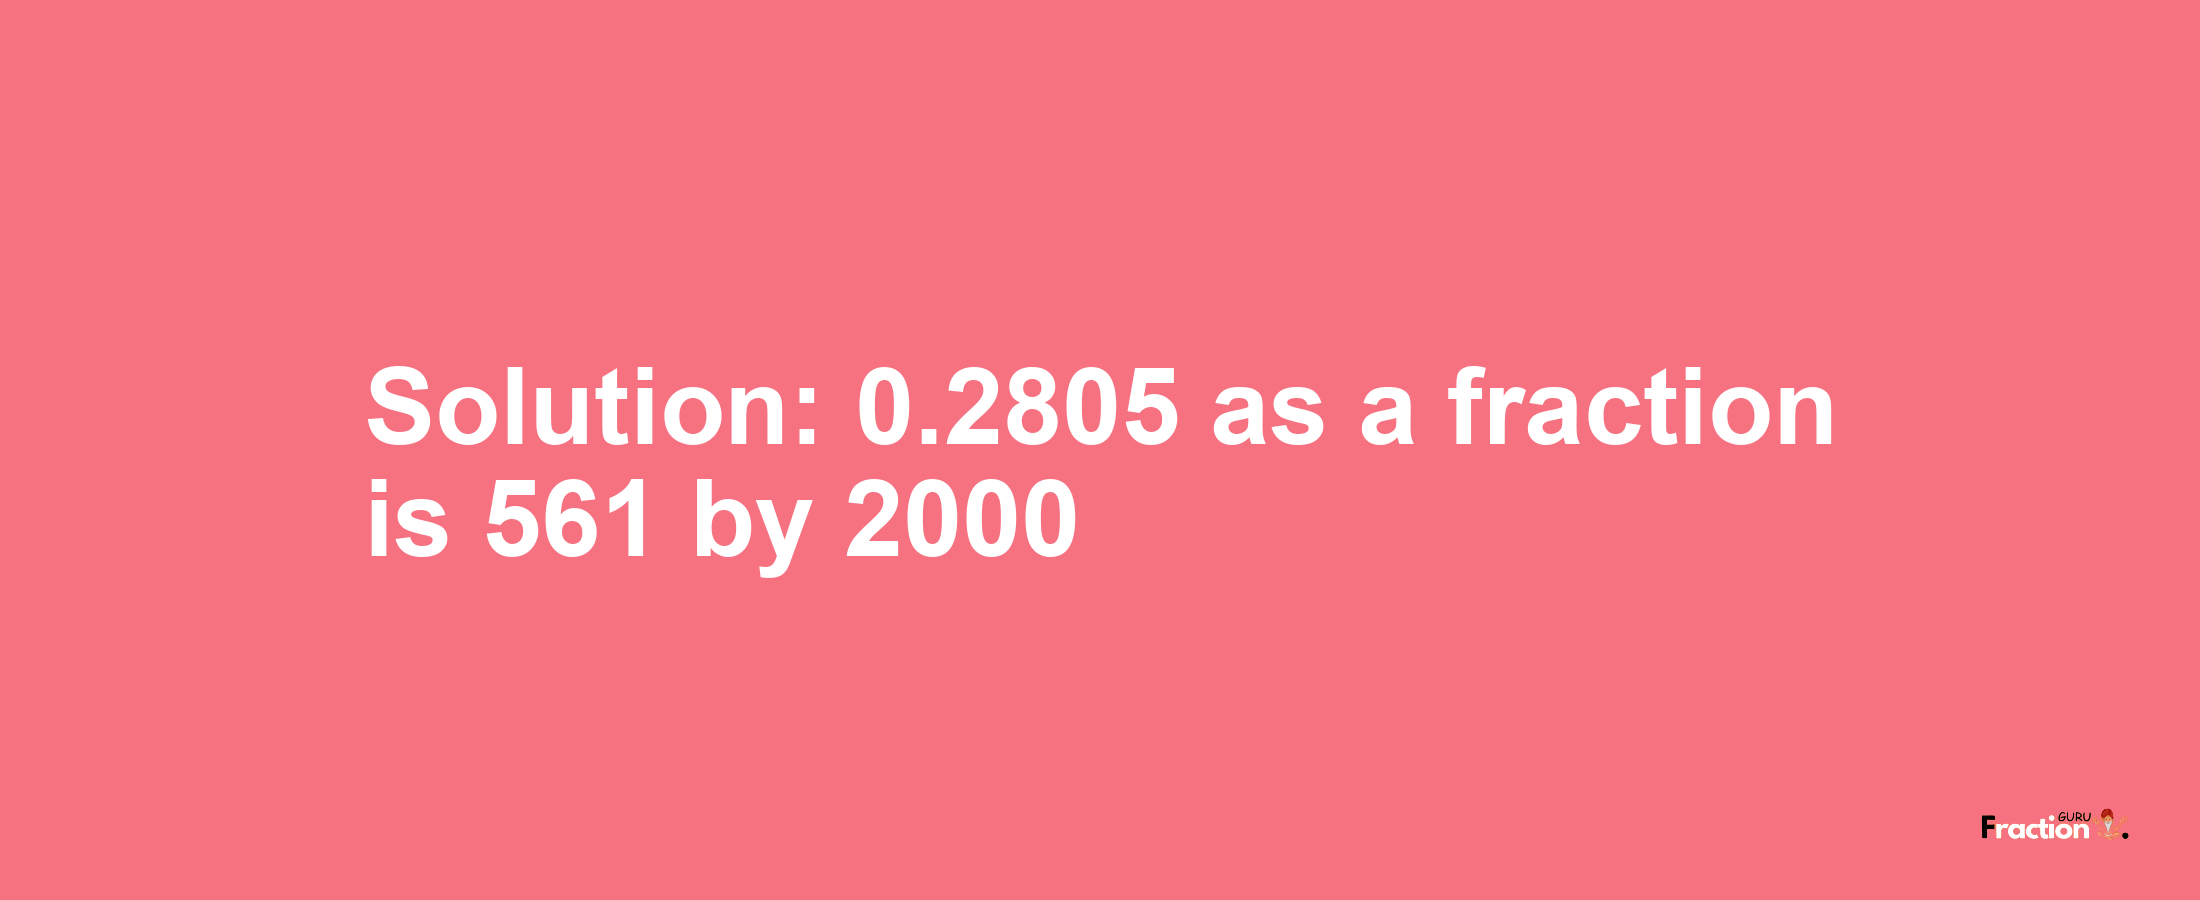 Solution:0.2805 as a fraction is 561/2000